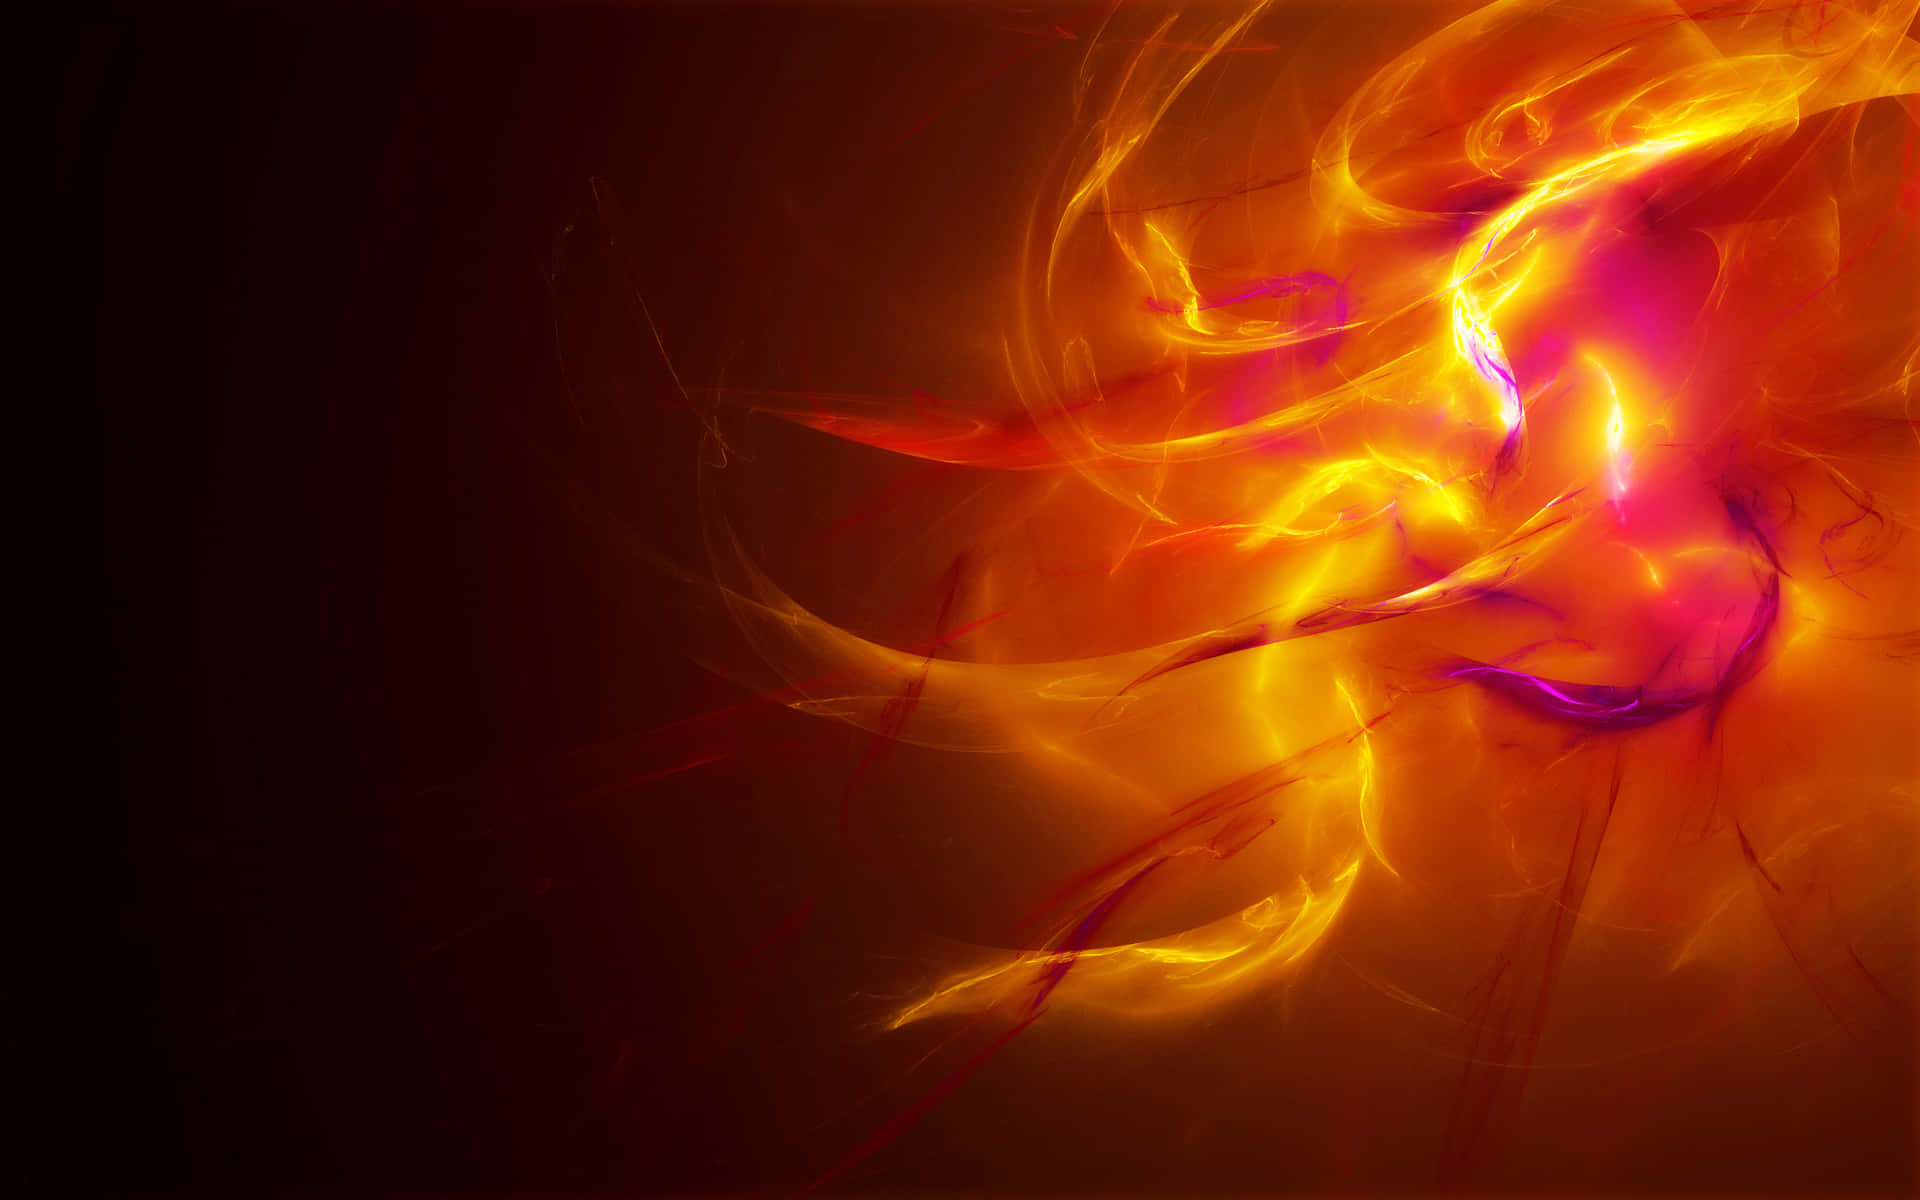 A Fire Wallpaper With A Red And Orange Flame